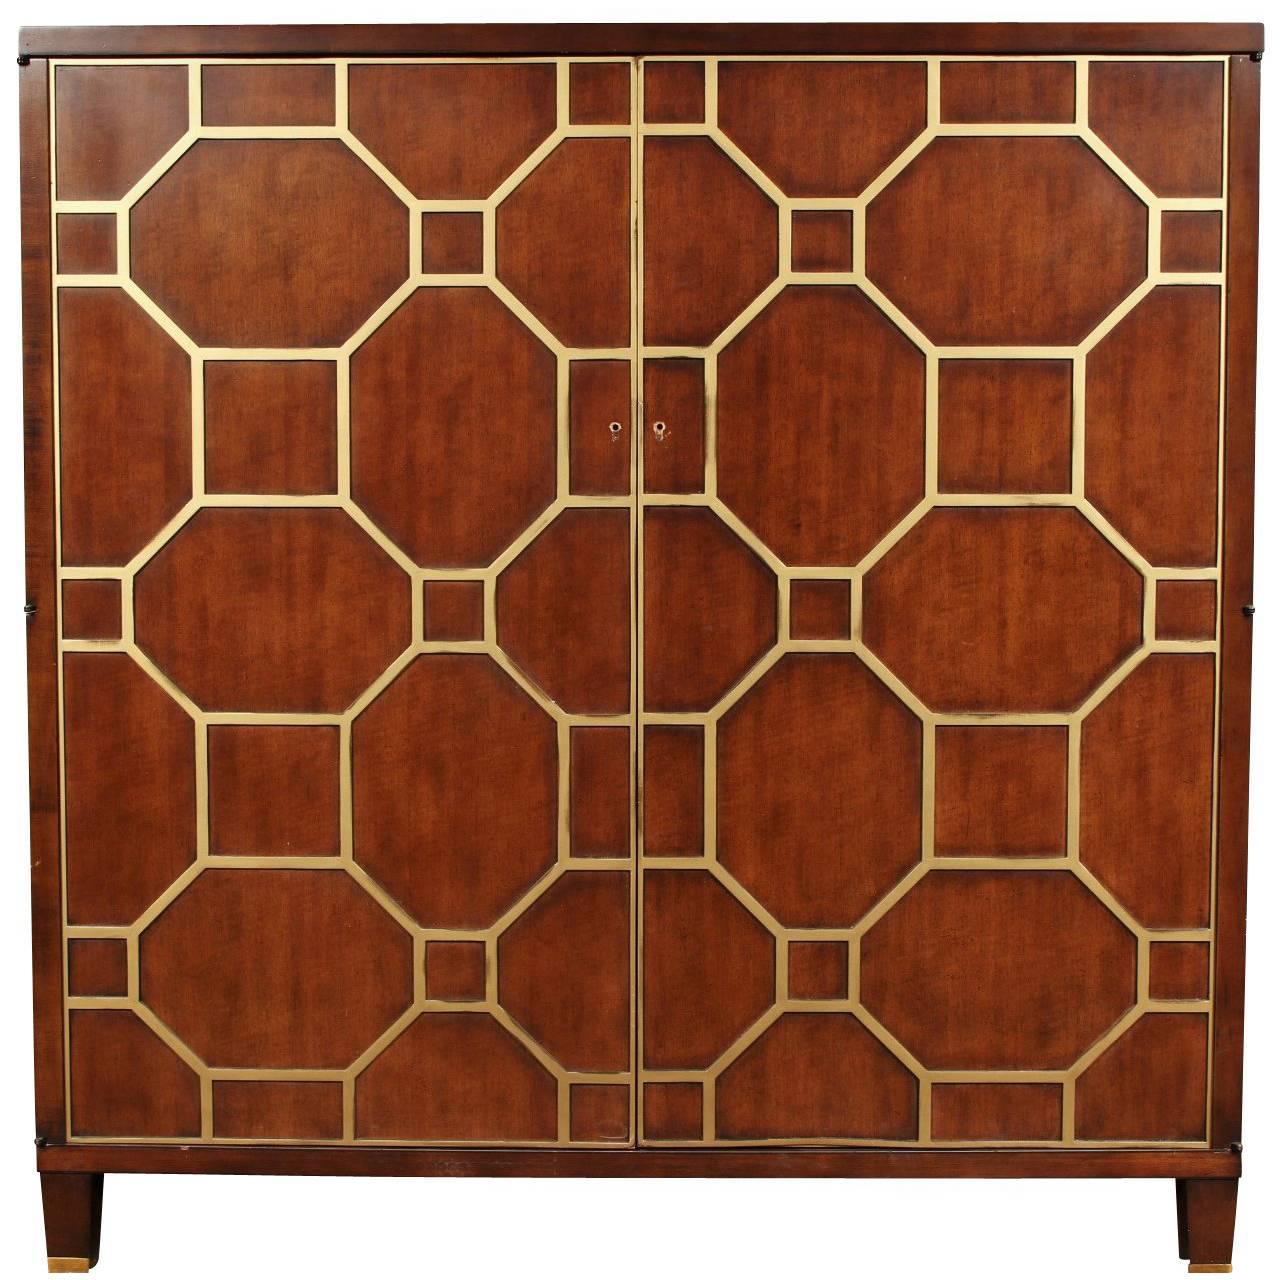 Suzanne Kasler for Hickory Chair Co Cabinet with Gilt Lattice Front Design